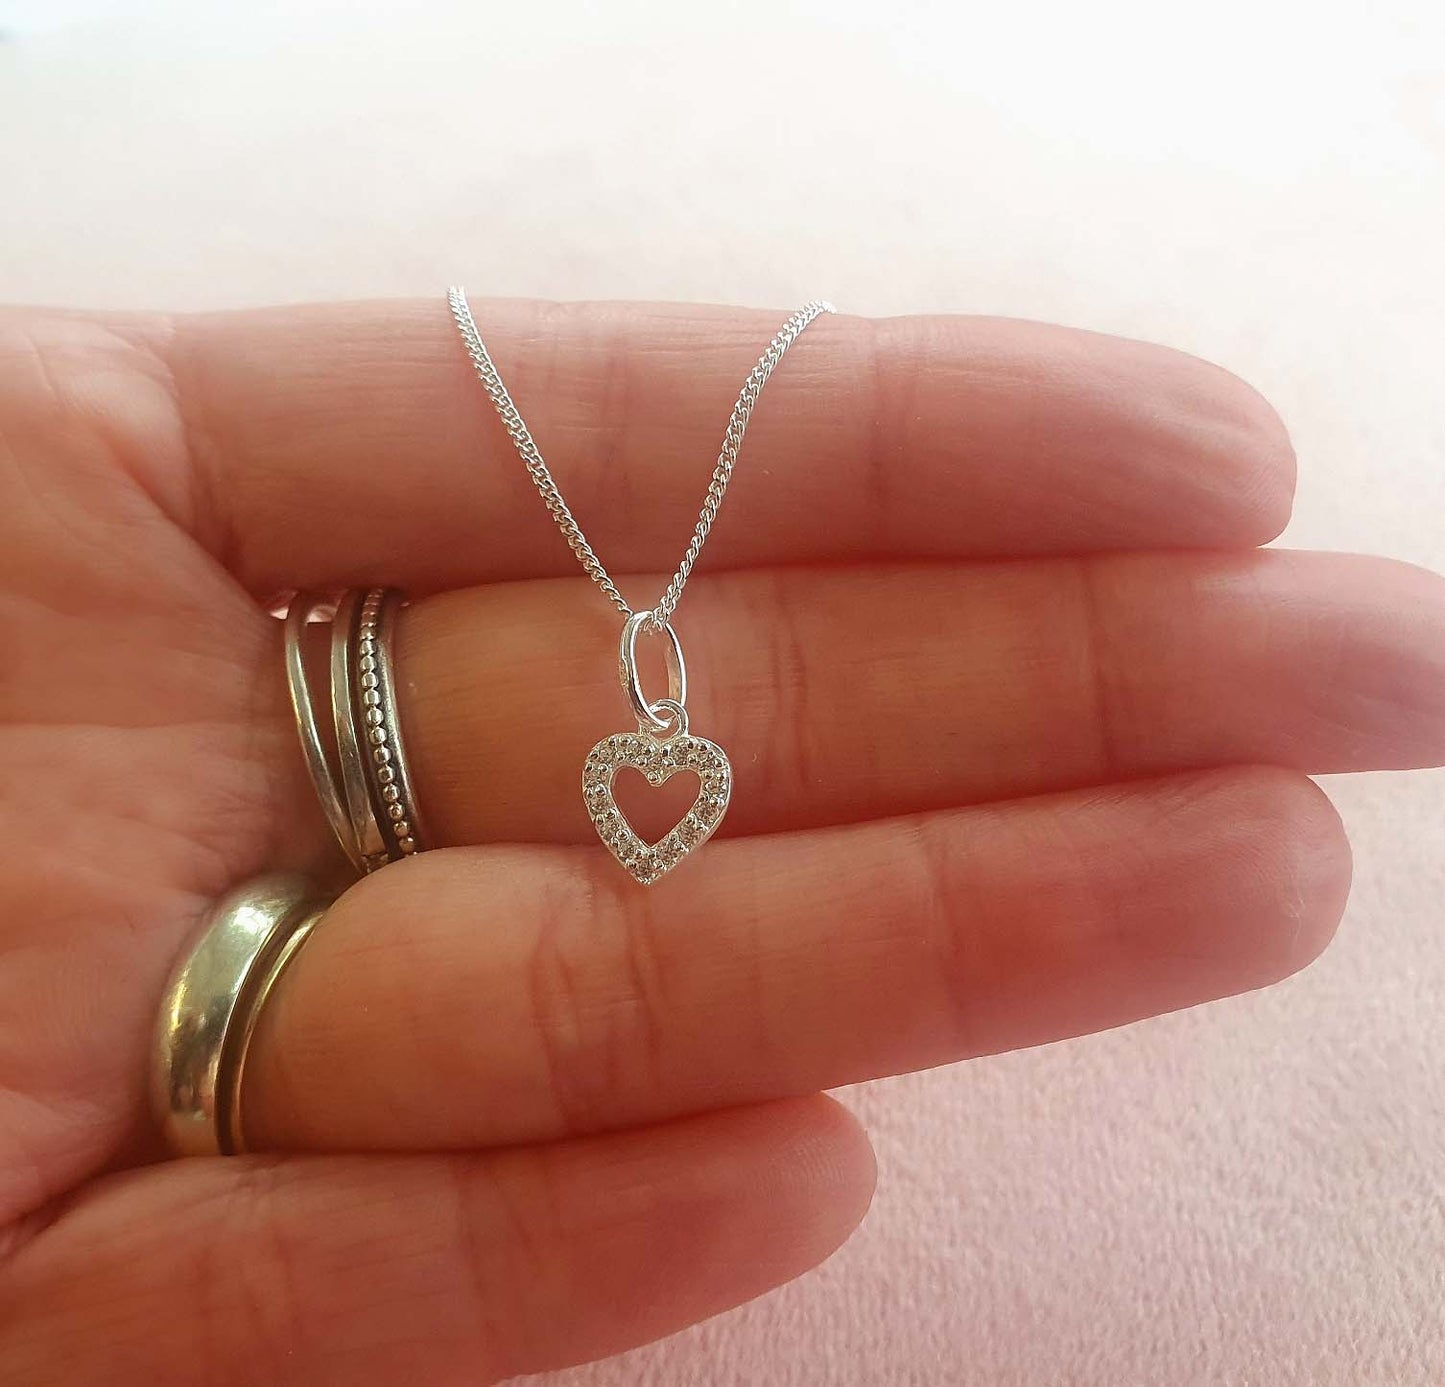 Flower Girl Heart Necklace with Cubic Zirconia in Sterling Silver 925, Personalised Gift